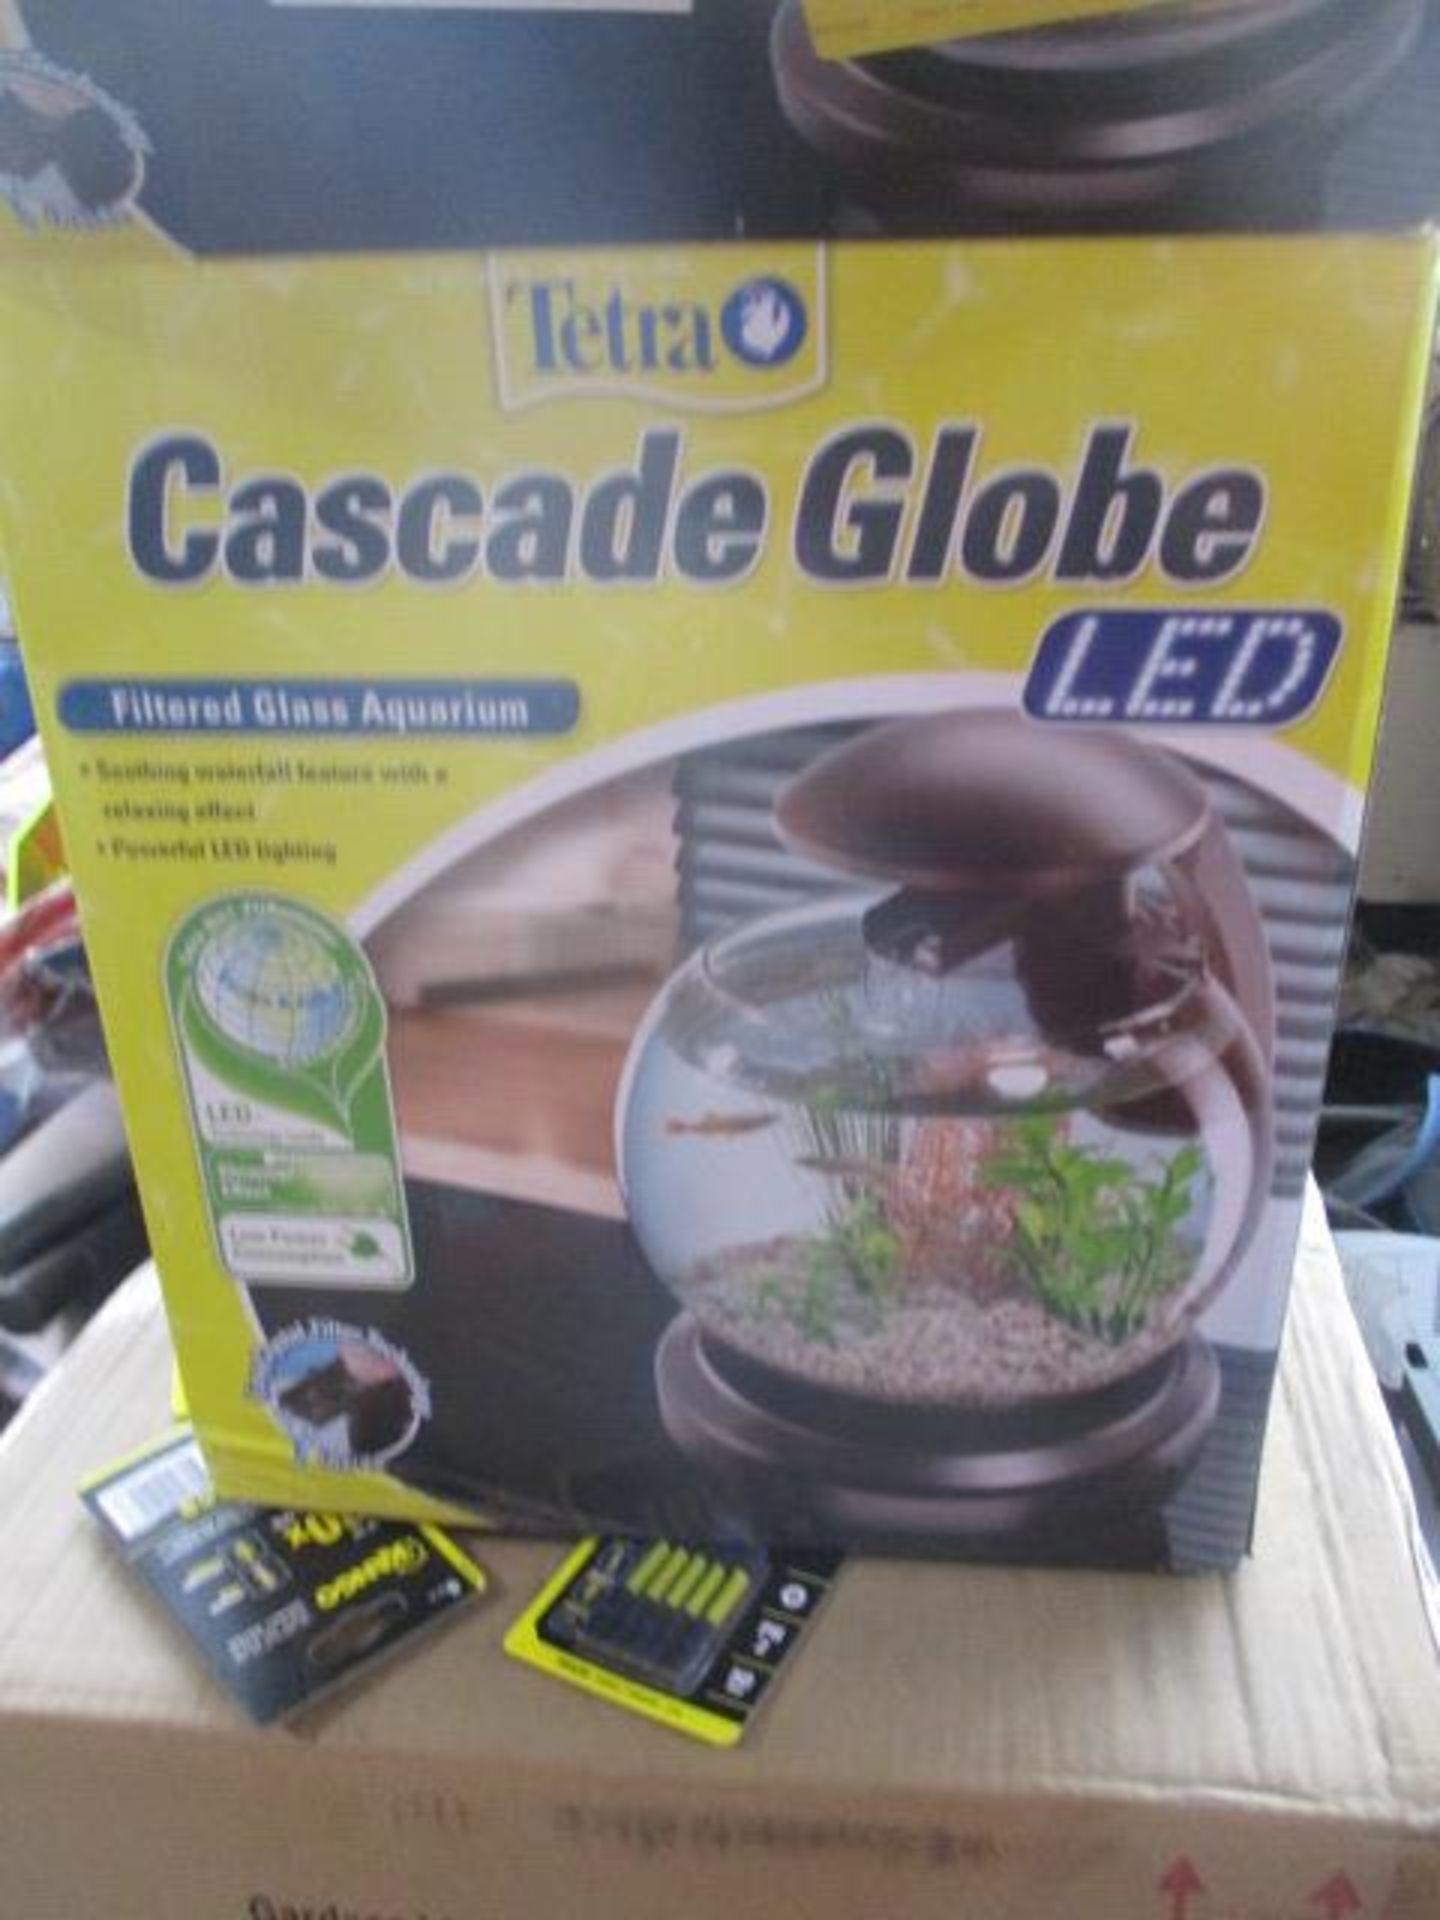 Globe fishtank by Tetra unchecked does not come with fish